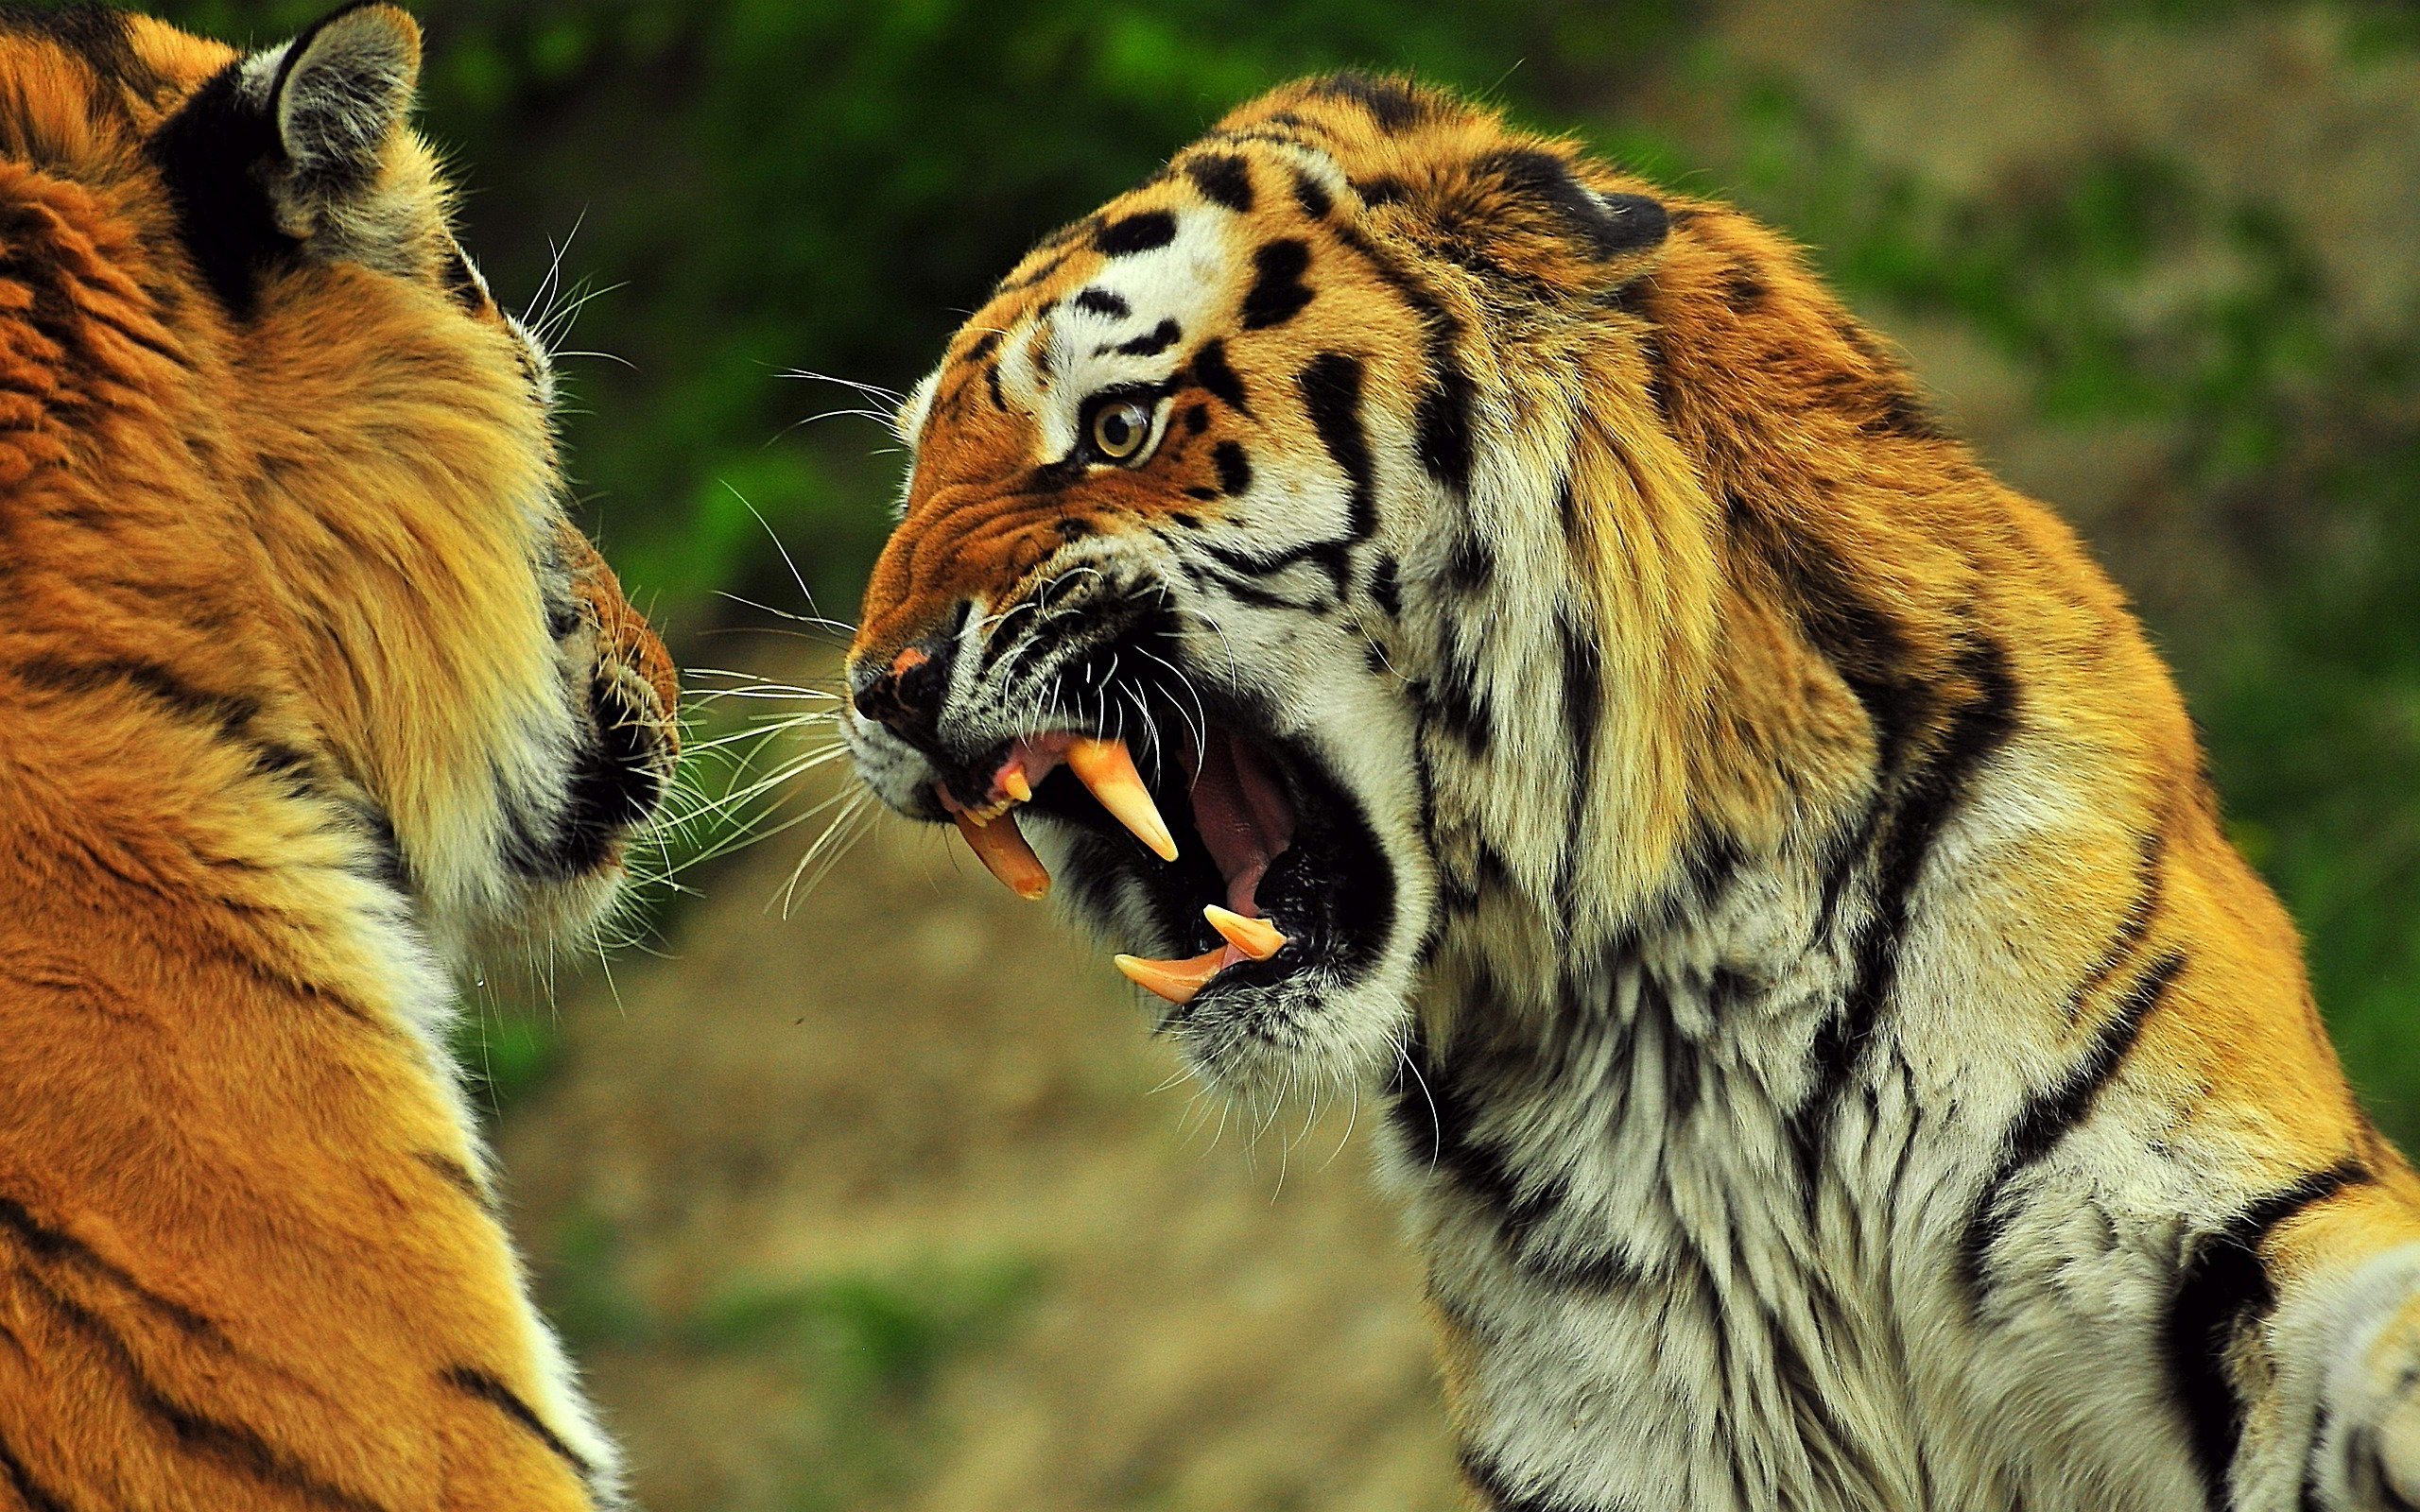 Angry Lion Photo Wallpaper - Tiger Agery - HD Wallpaper 